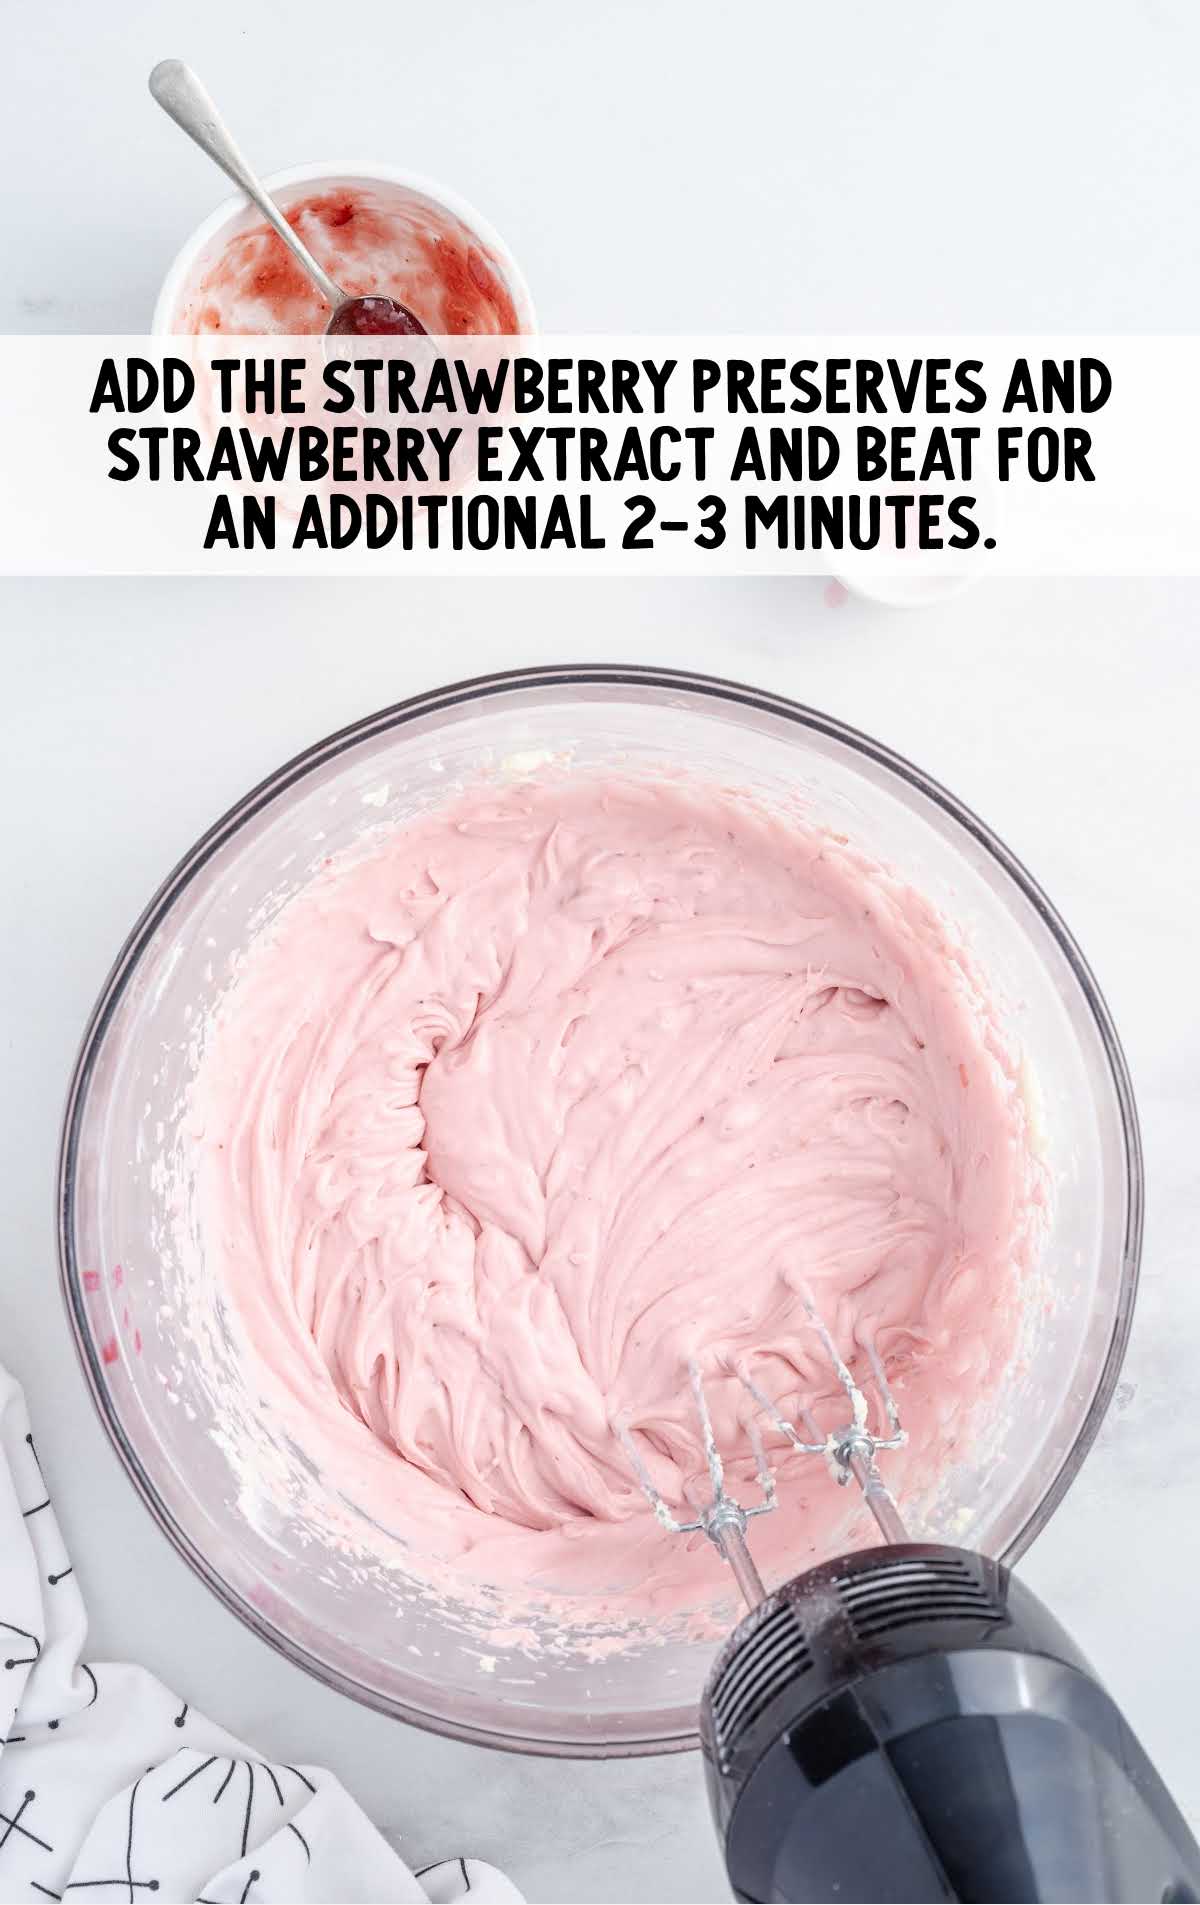 strawberry preserves and strawberry extract added to the cream cheese mixture in a bowl and blended